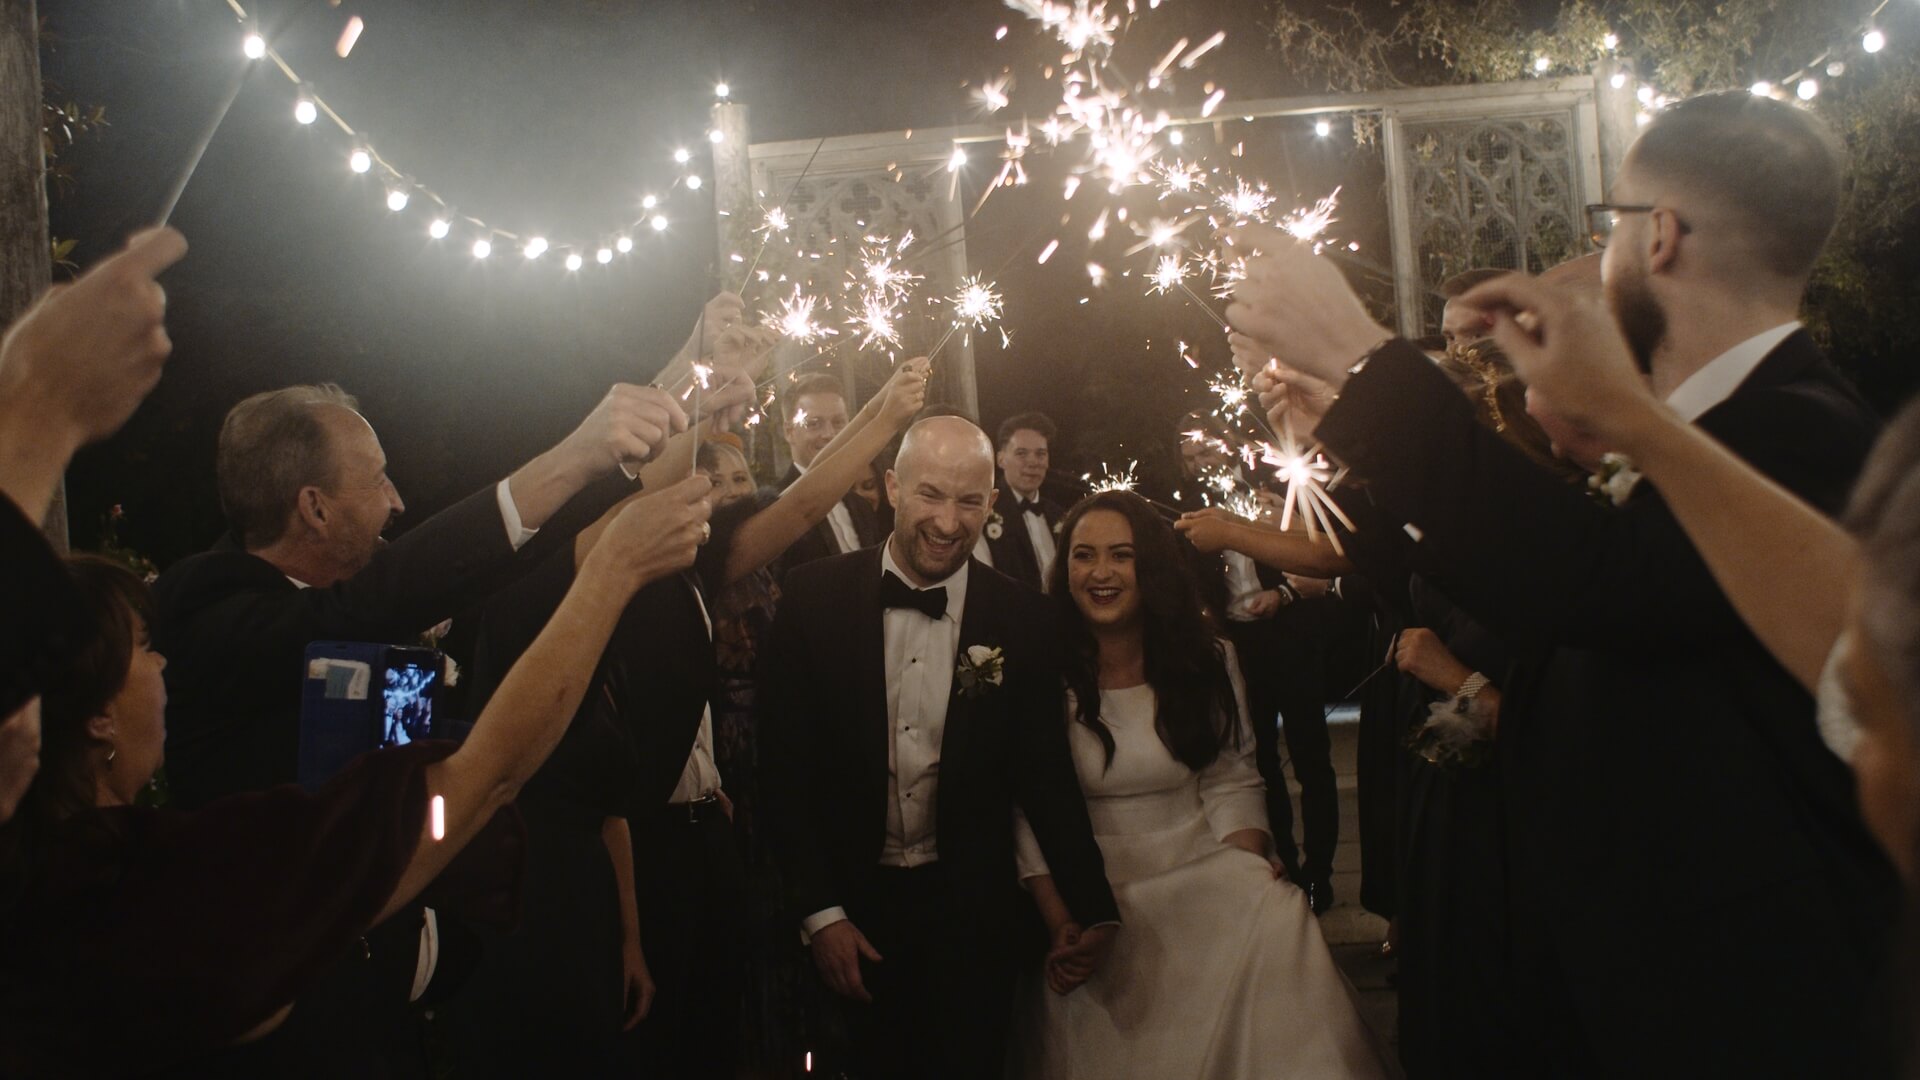 Is a wedding videographer worth it?